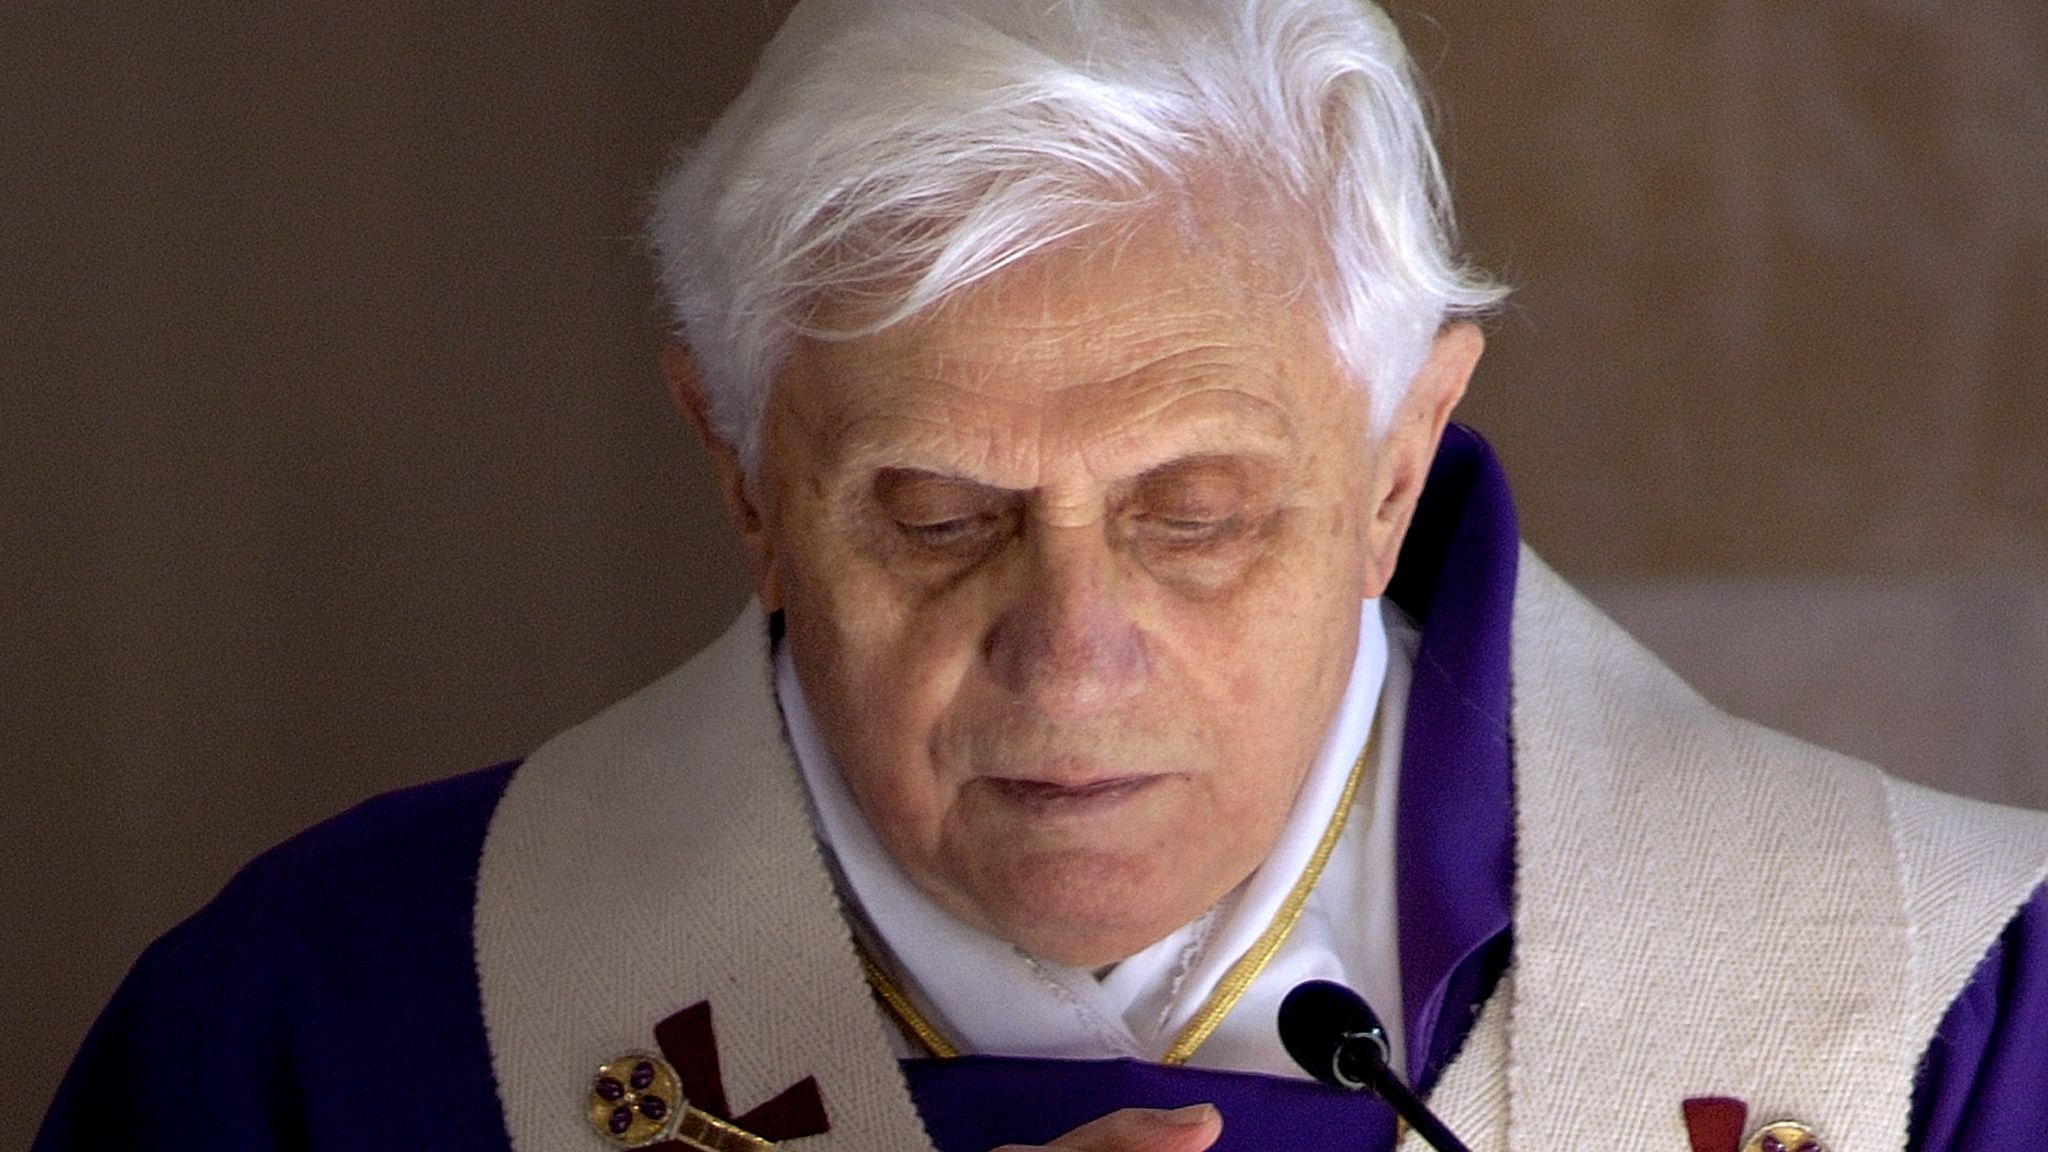 Former pope Benedict XVI's condition 'serious but stable', Vatican says